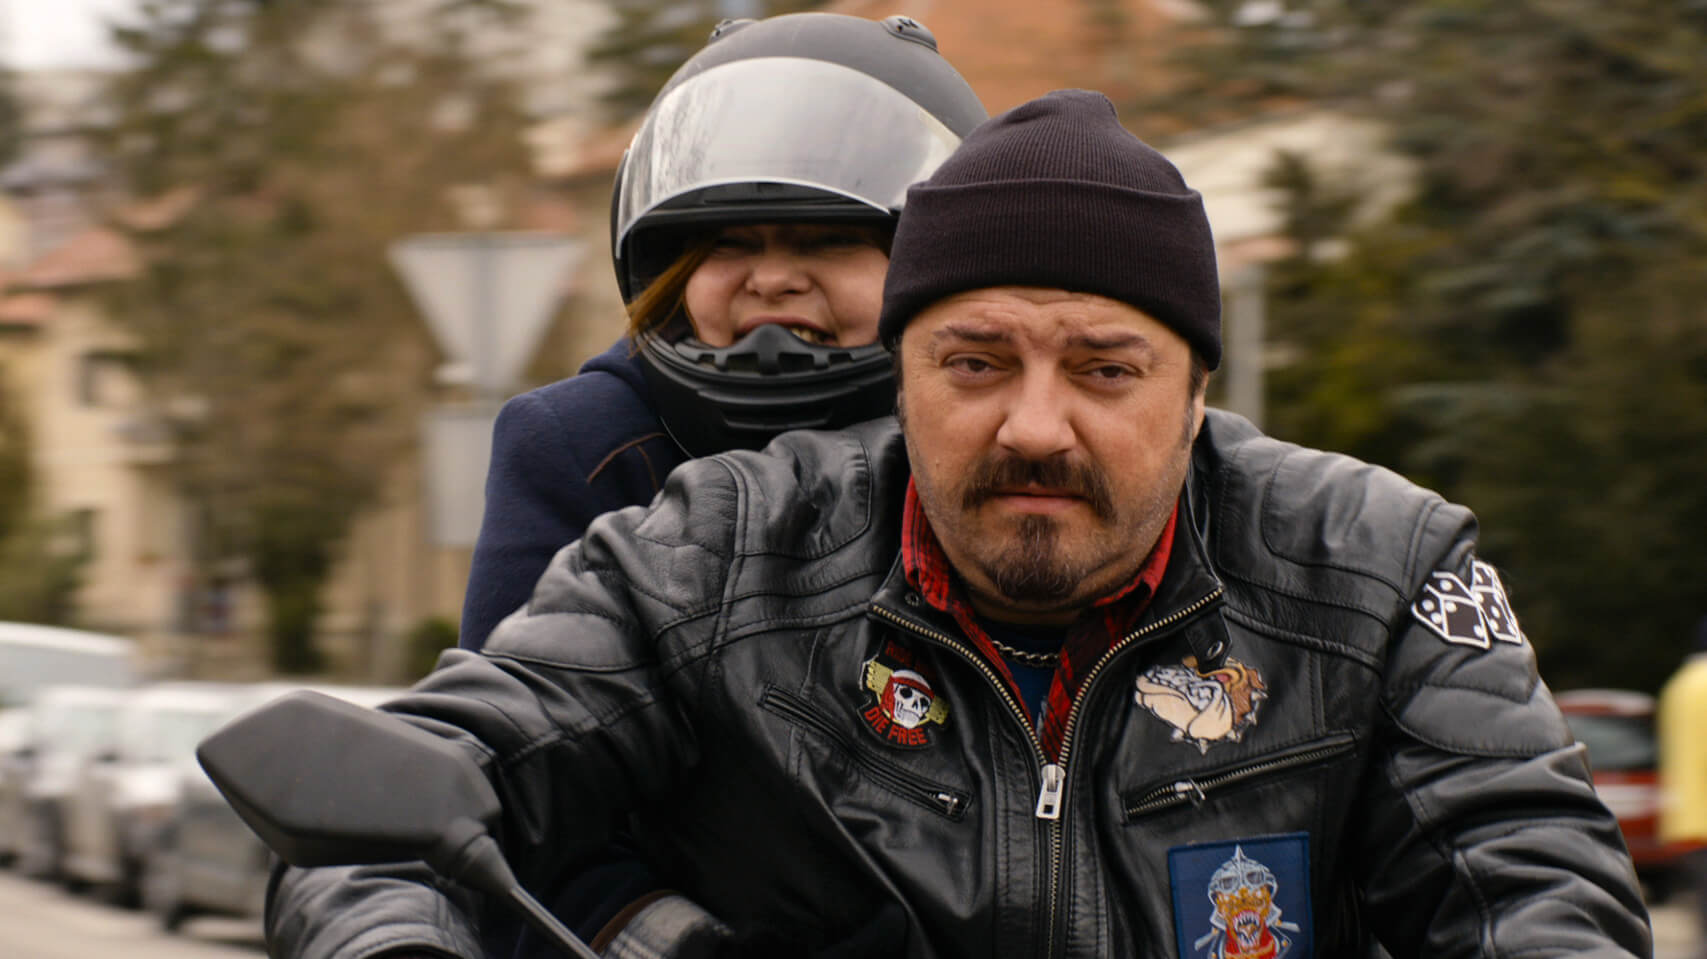 Croatian Comedy “All the Best” Premieres in UK